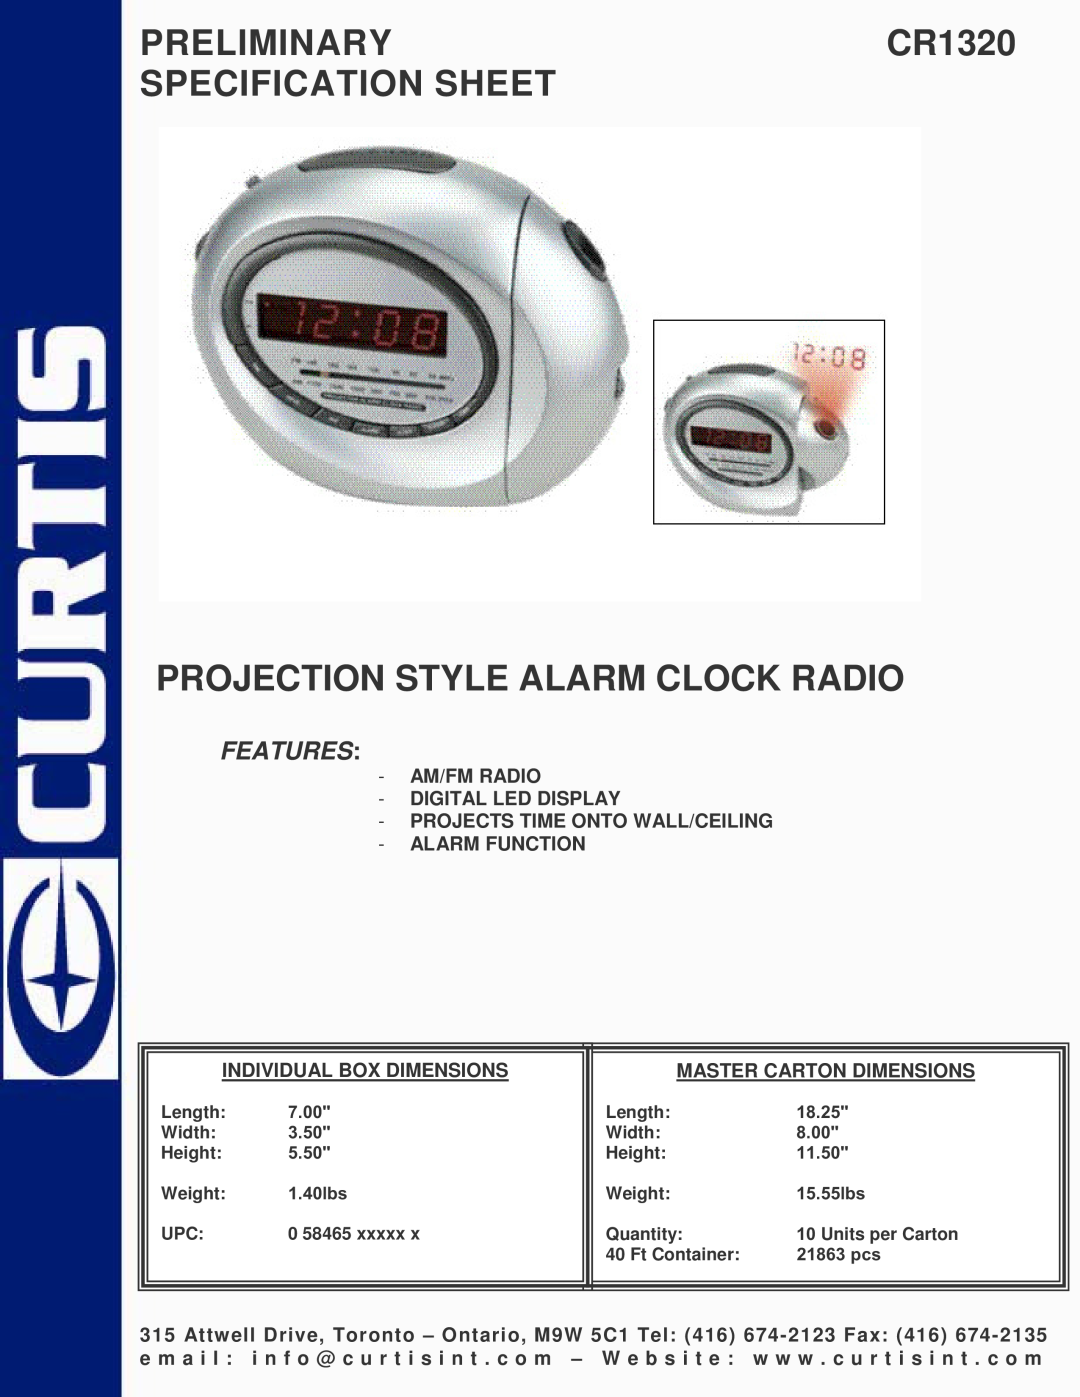 Curtis specifications PRELIMINARYCR1320 SPECIFICATION SHEET, Projection Style Alarm Clock Radio, Features 